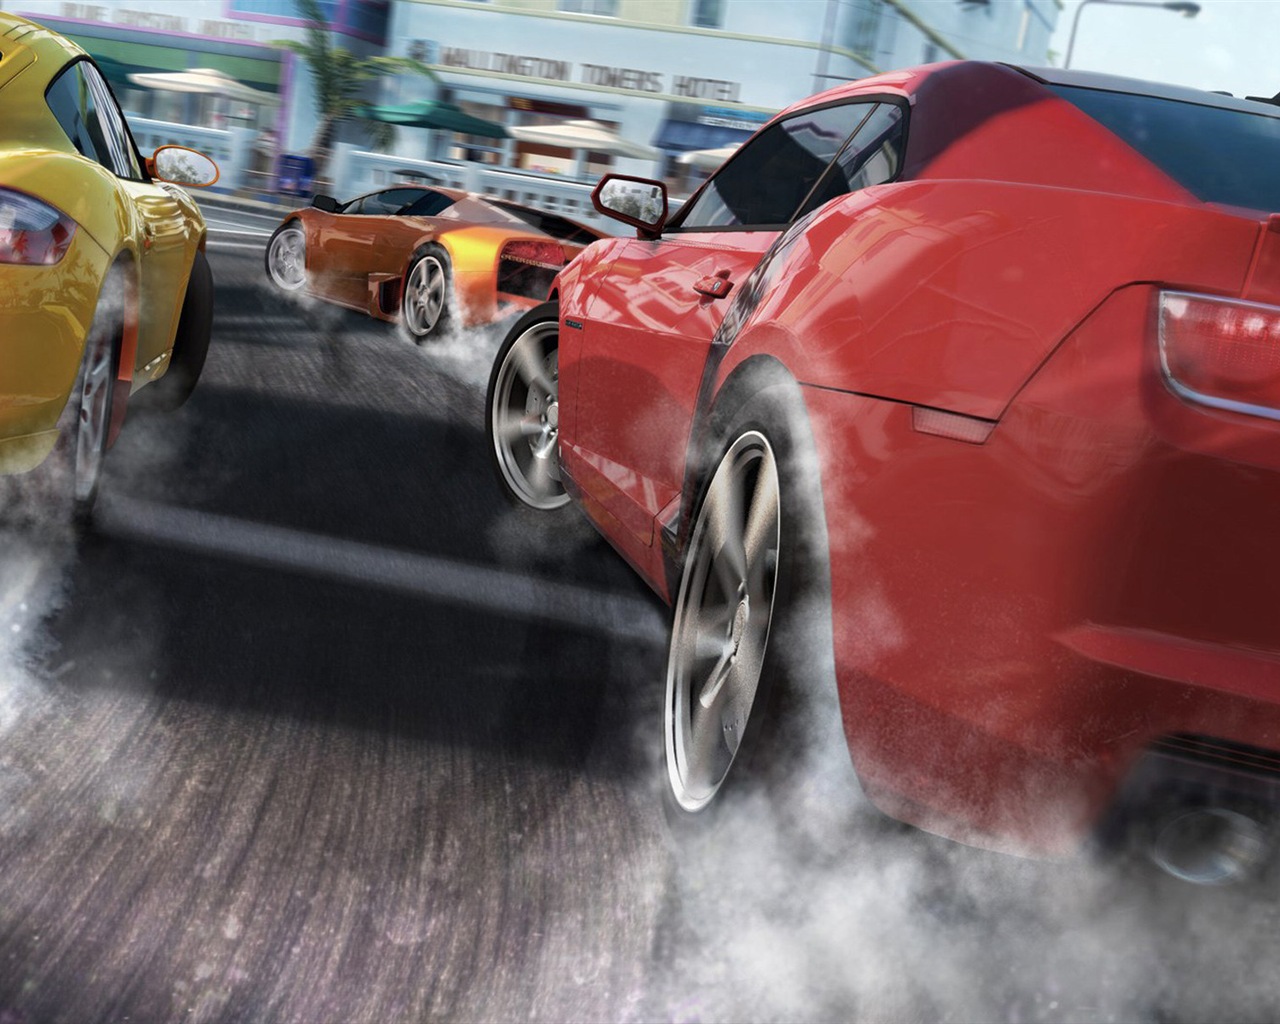 The Crew game HD wallpapers #6 - 1280x1024